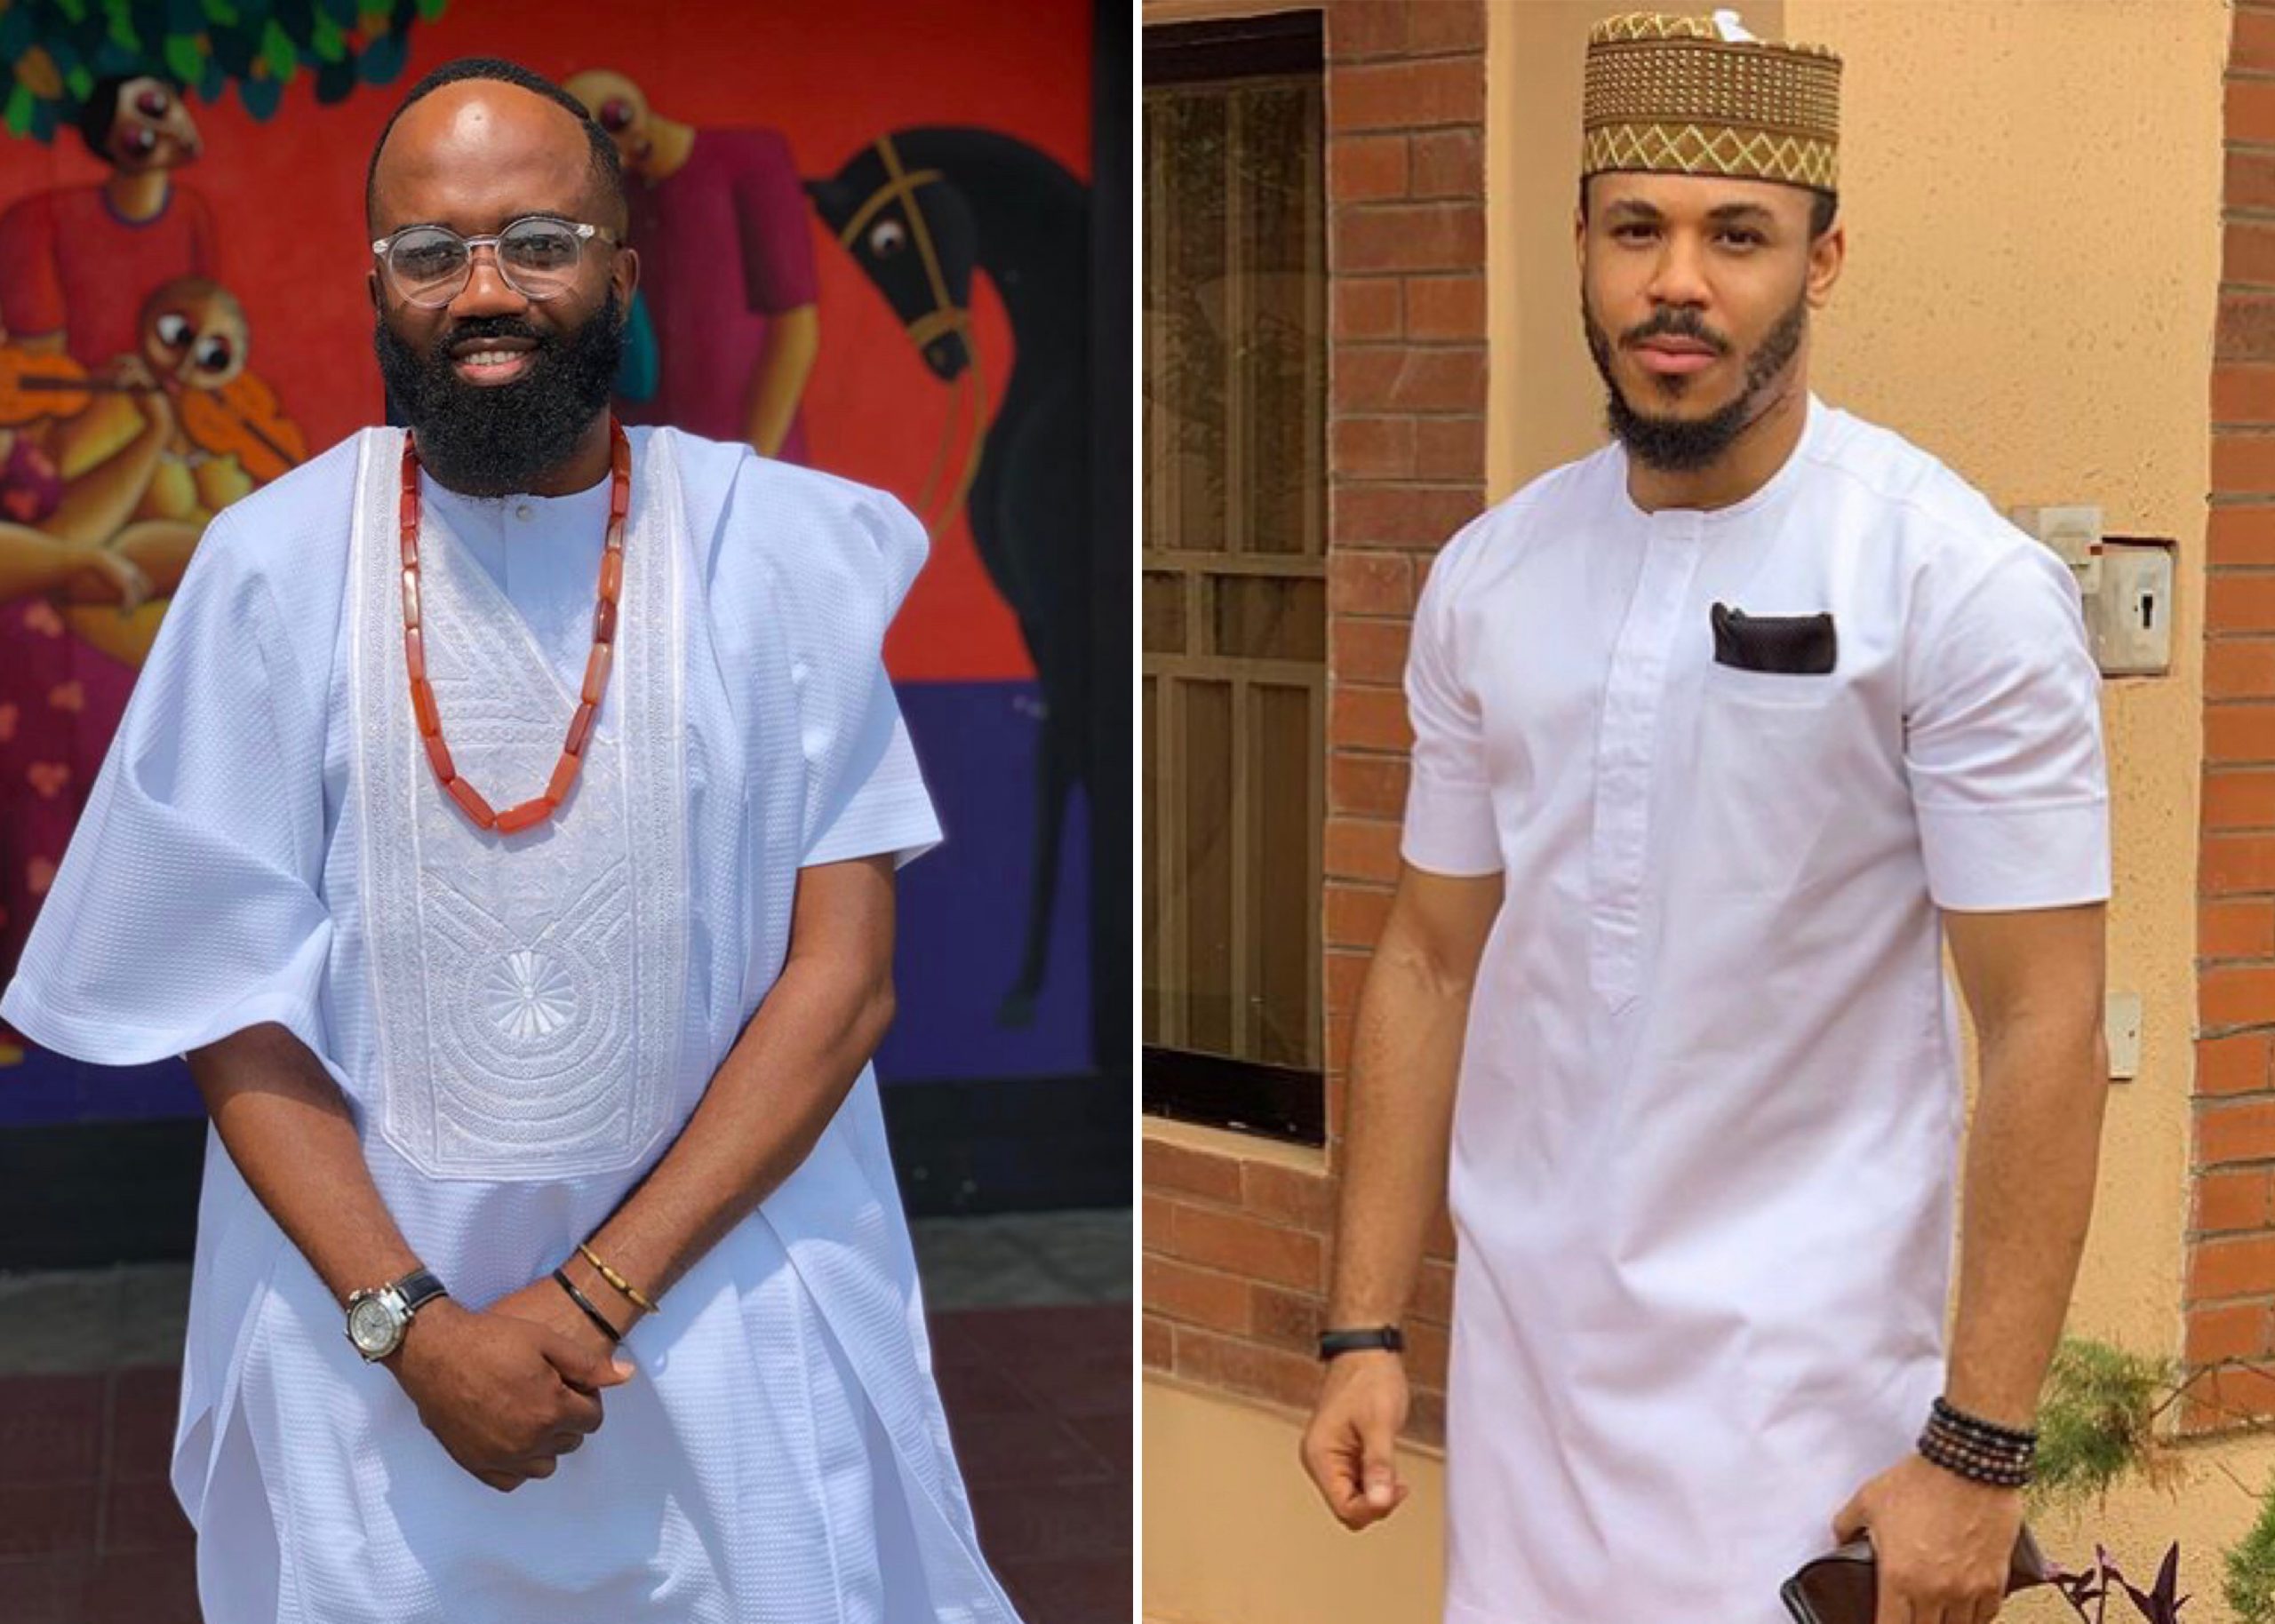 BBNaija 2020: Media Personality, Noble Igwe Gifts Ozo All Expense Paid Trip To Cyprus Following Eviction From Show